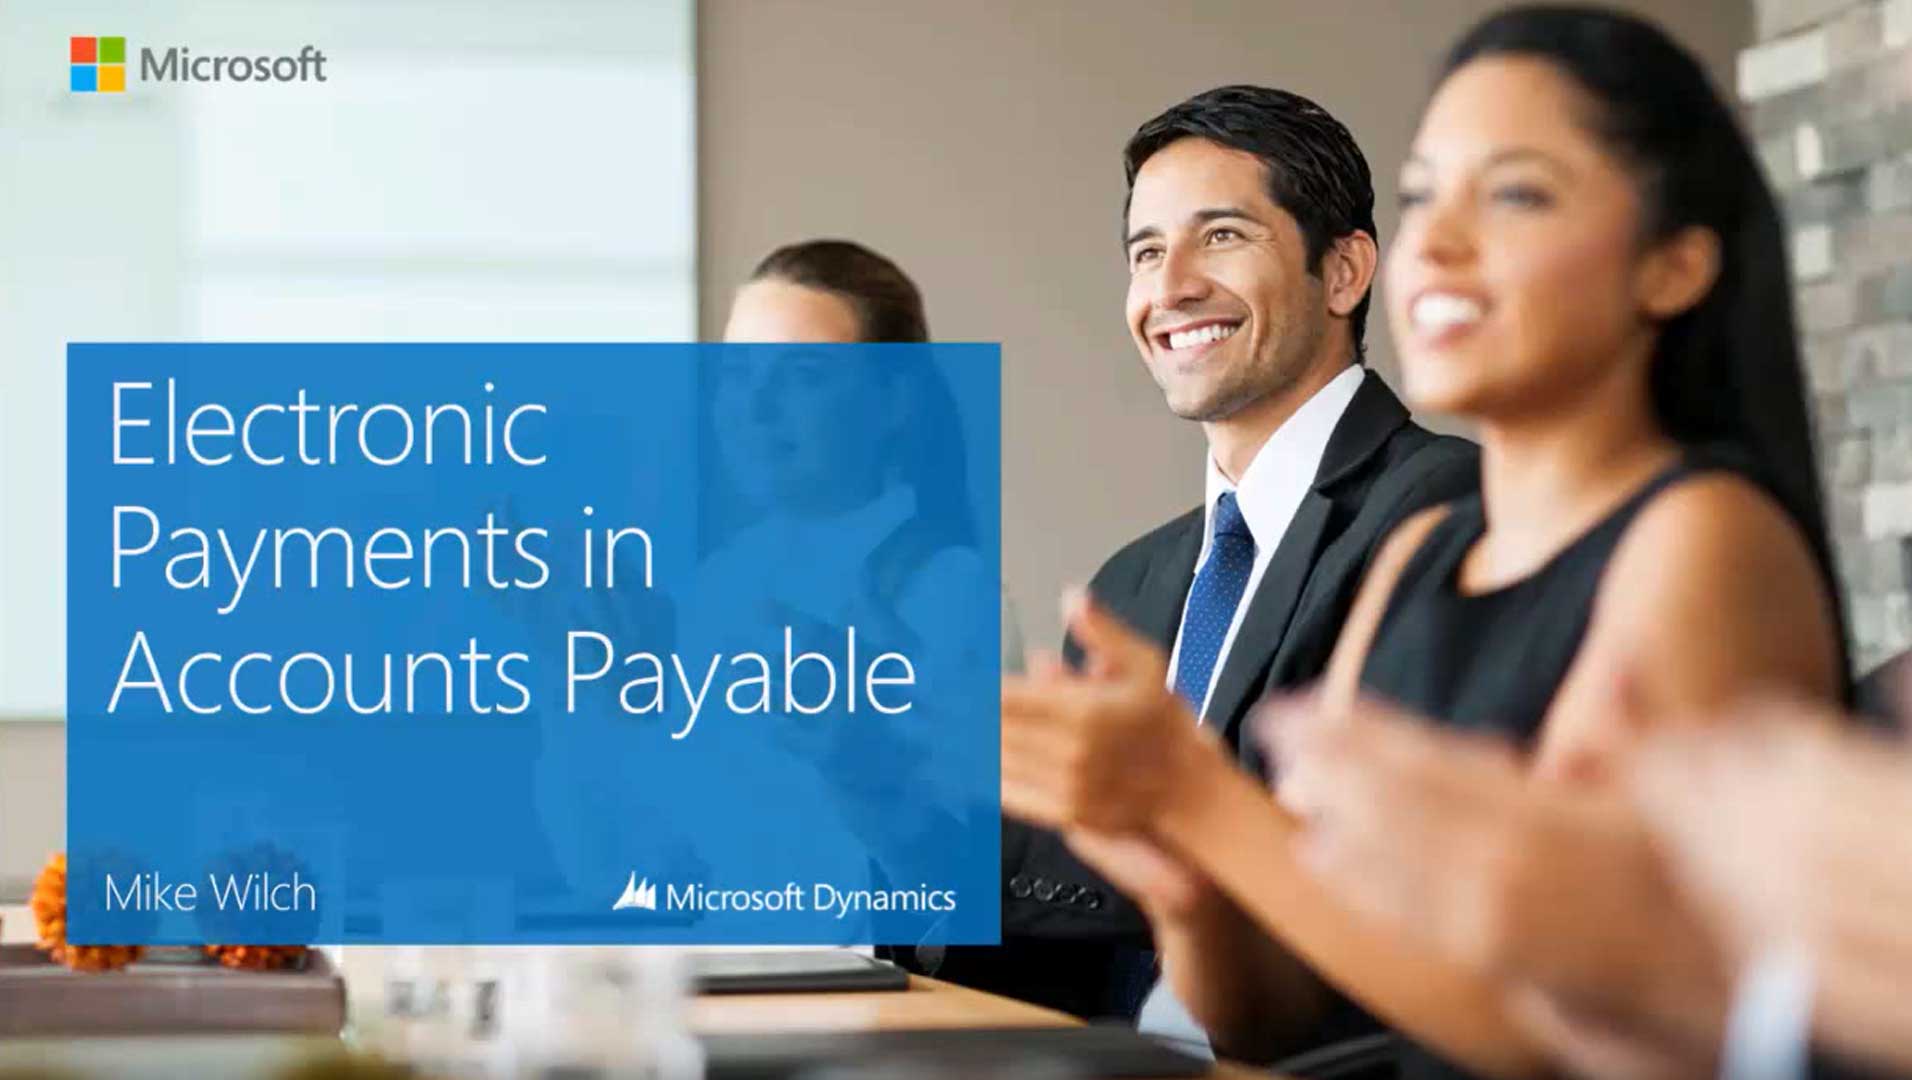 sl-video-2015-accounts-payable-payments-1 Using the Electronic Payment Option in Dynamics SL — Accounts Payable